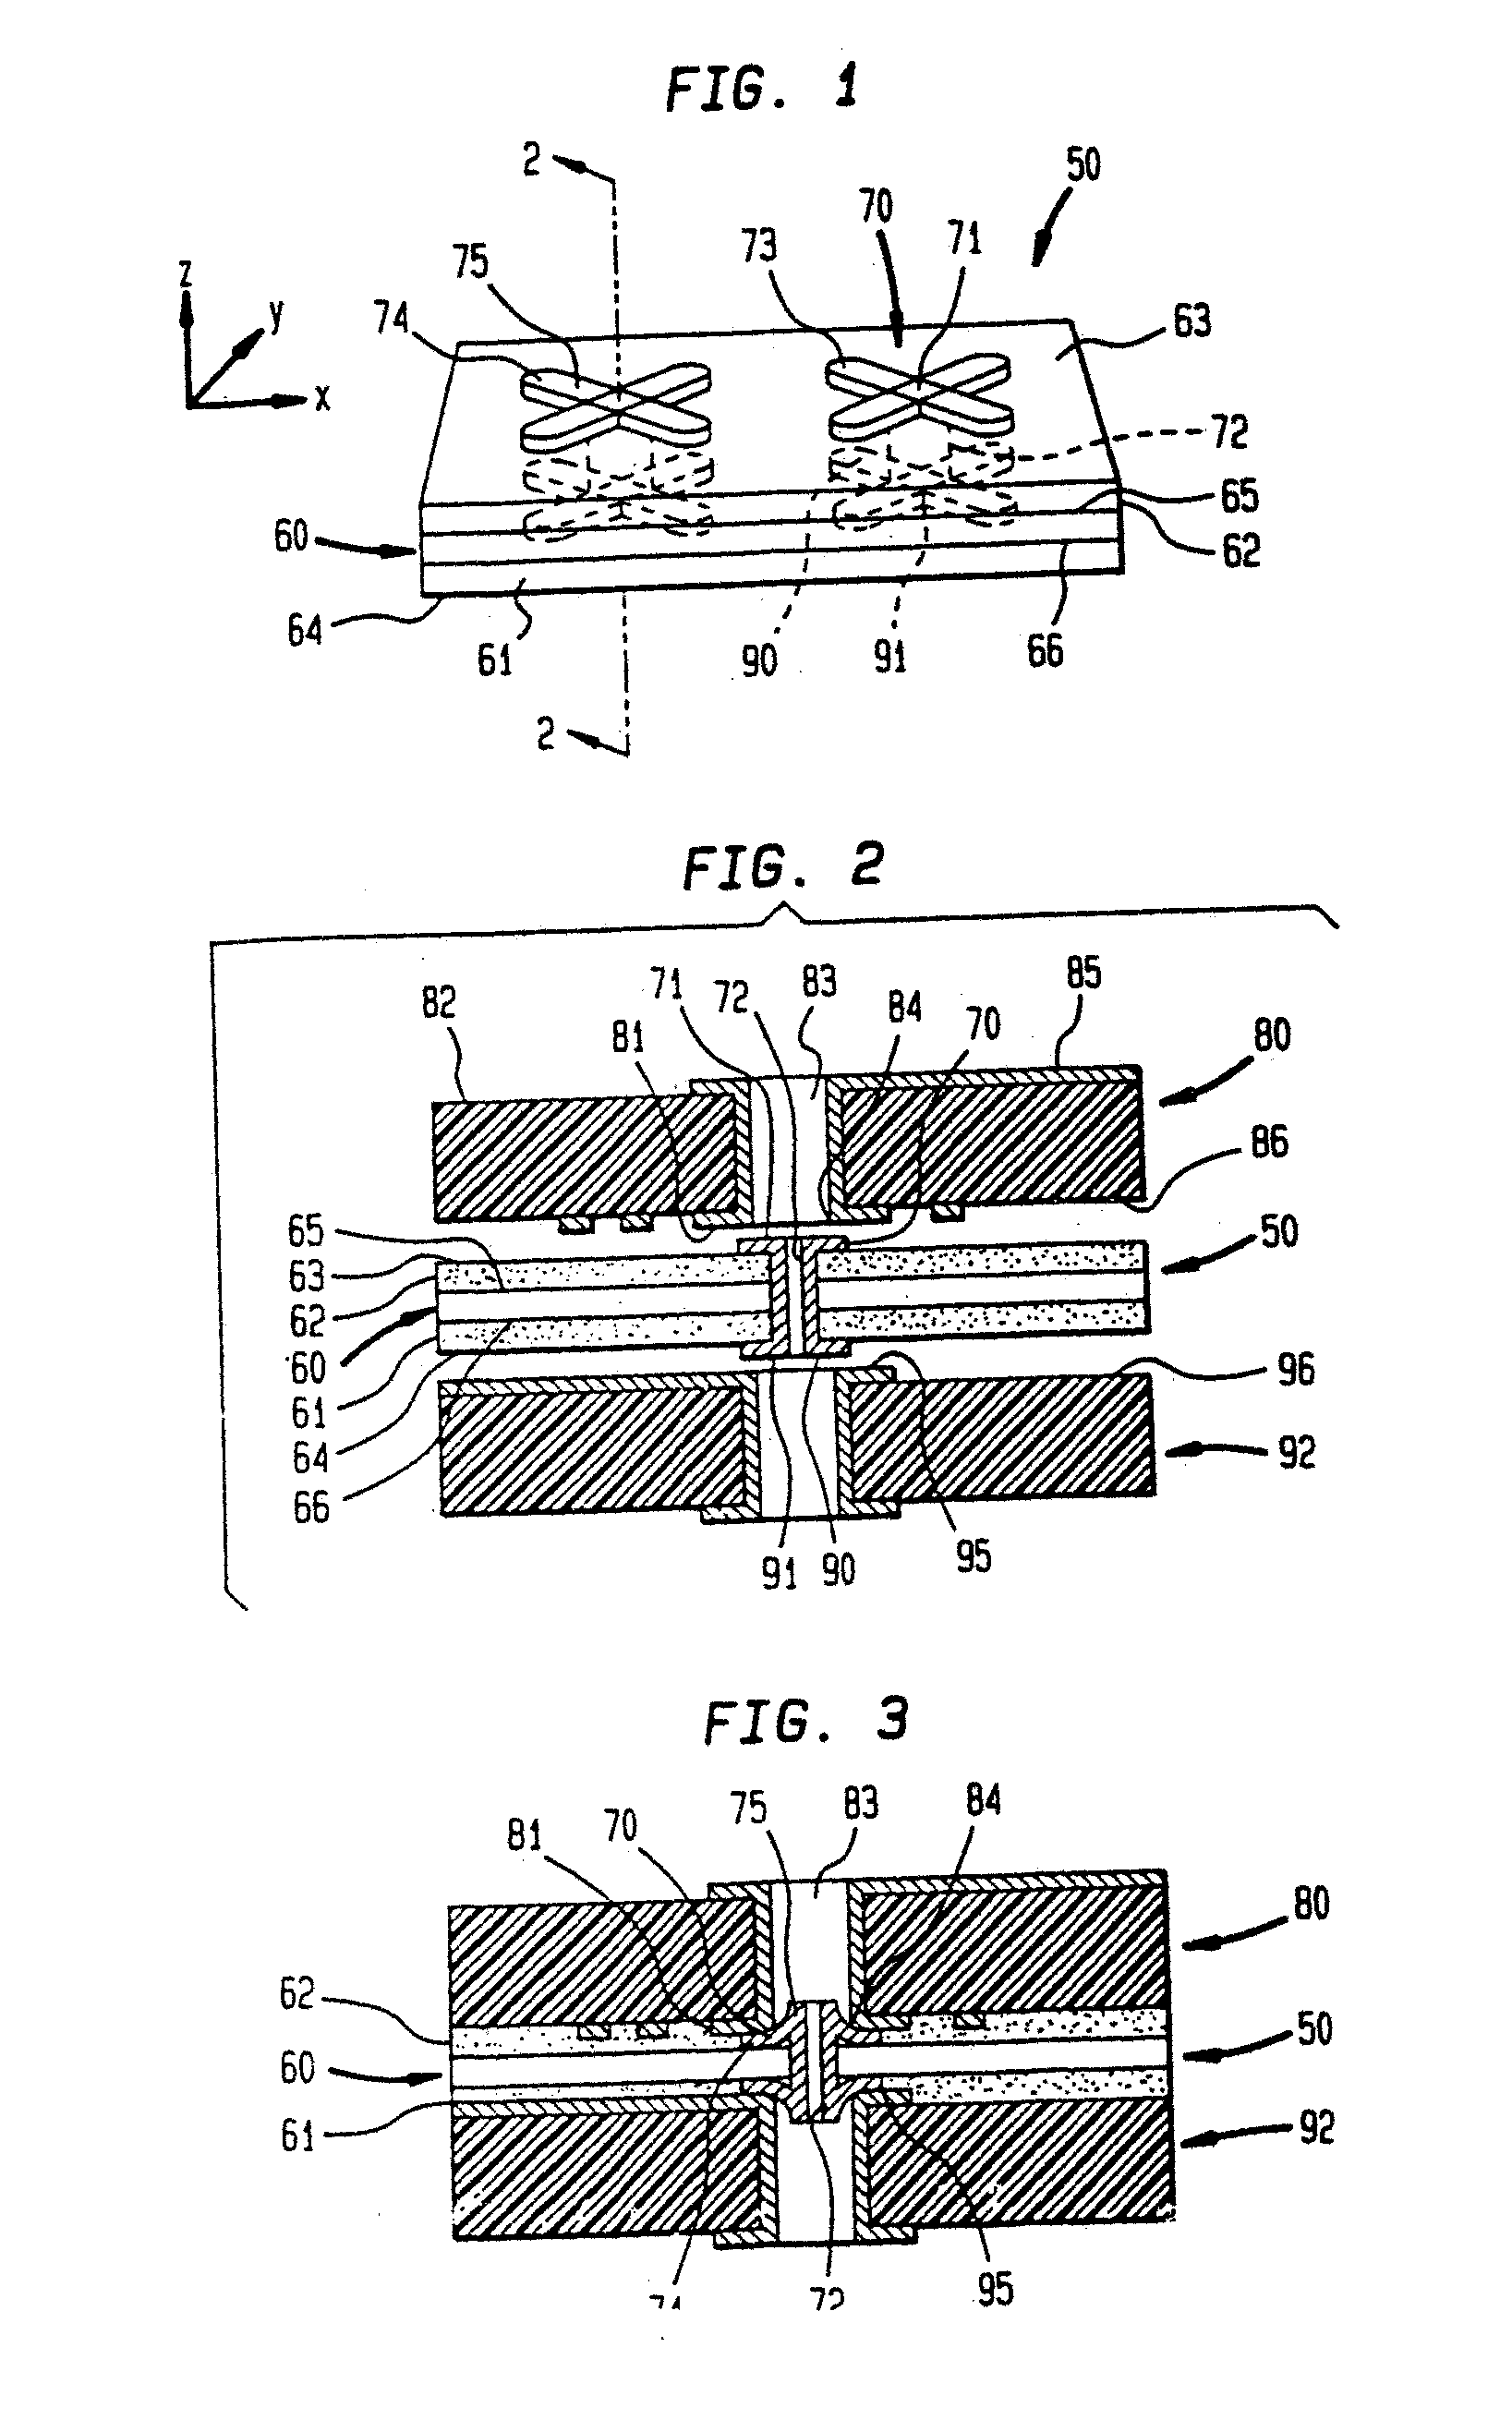 Method for making a microelectronic interposer